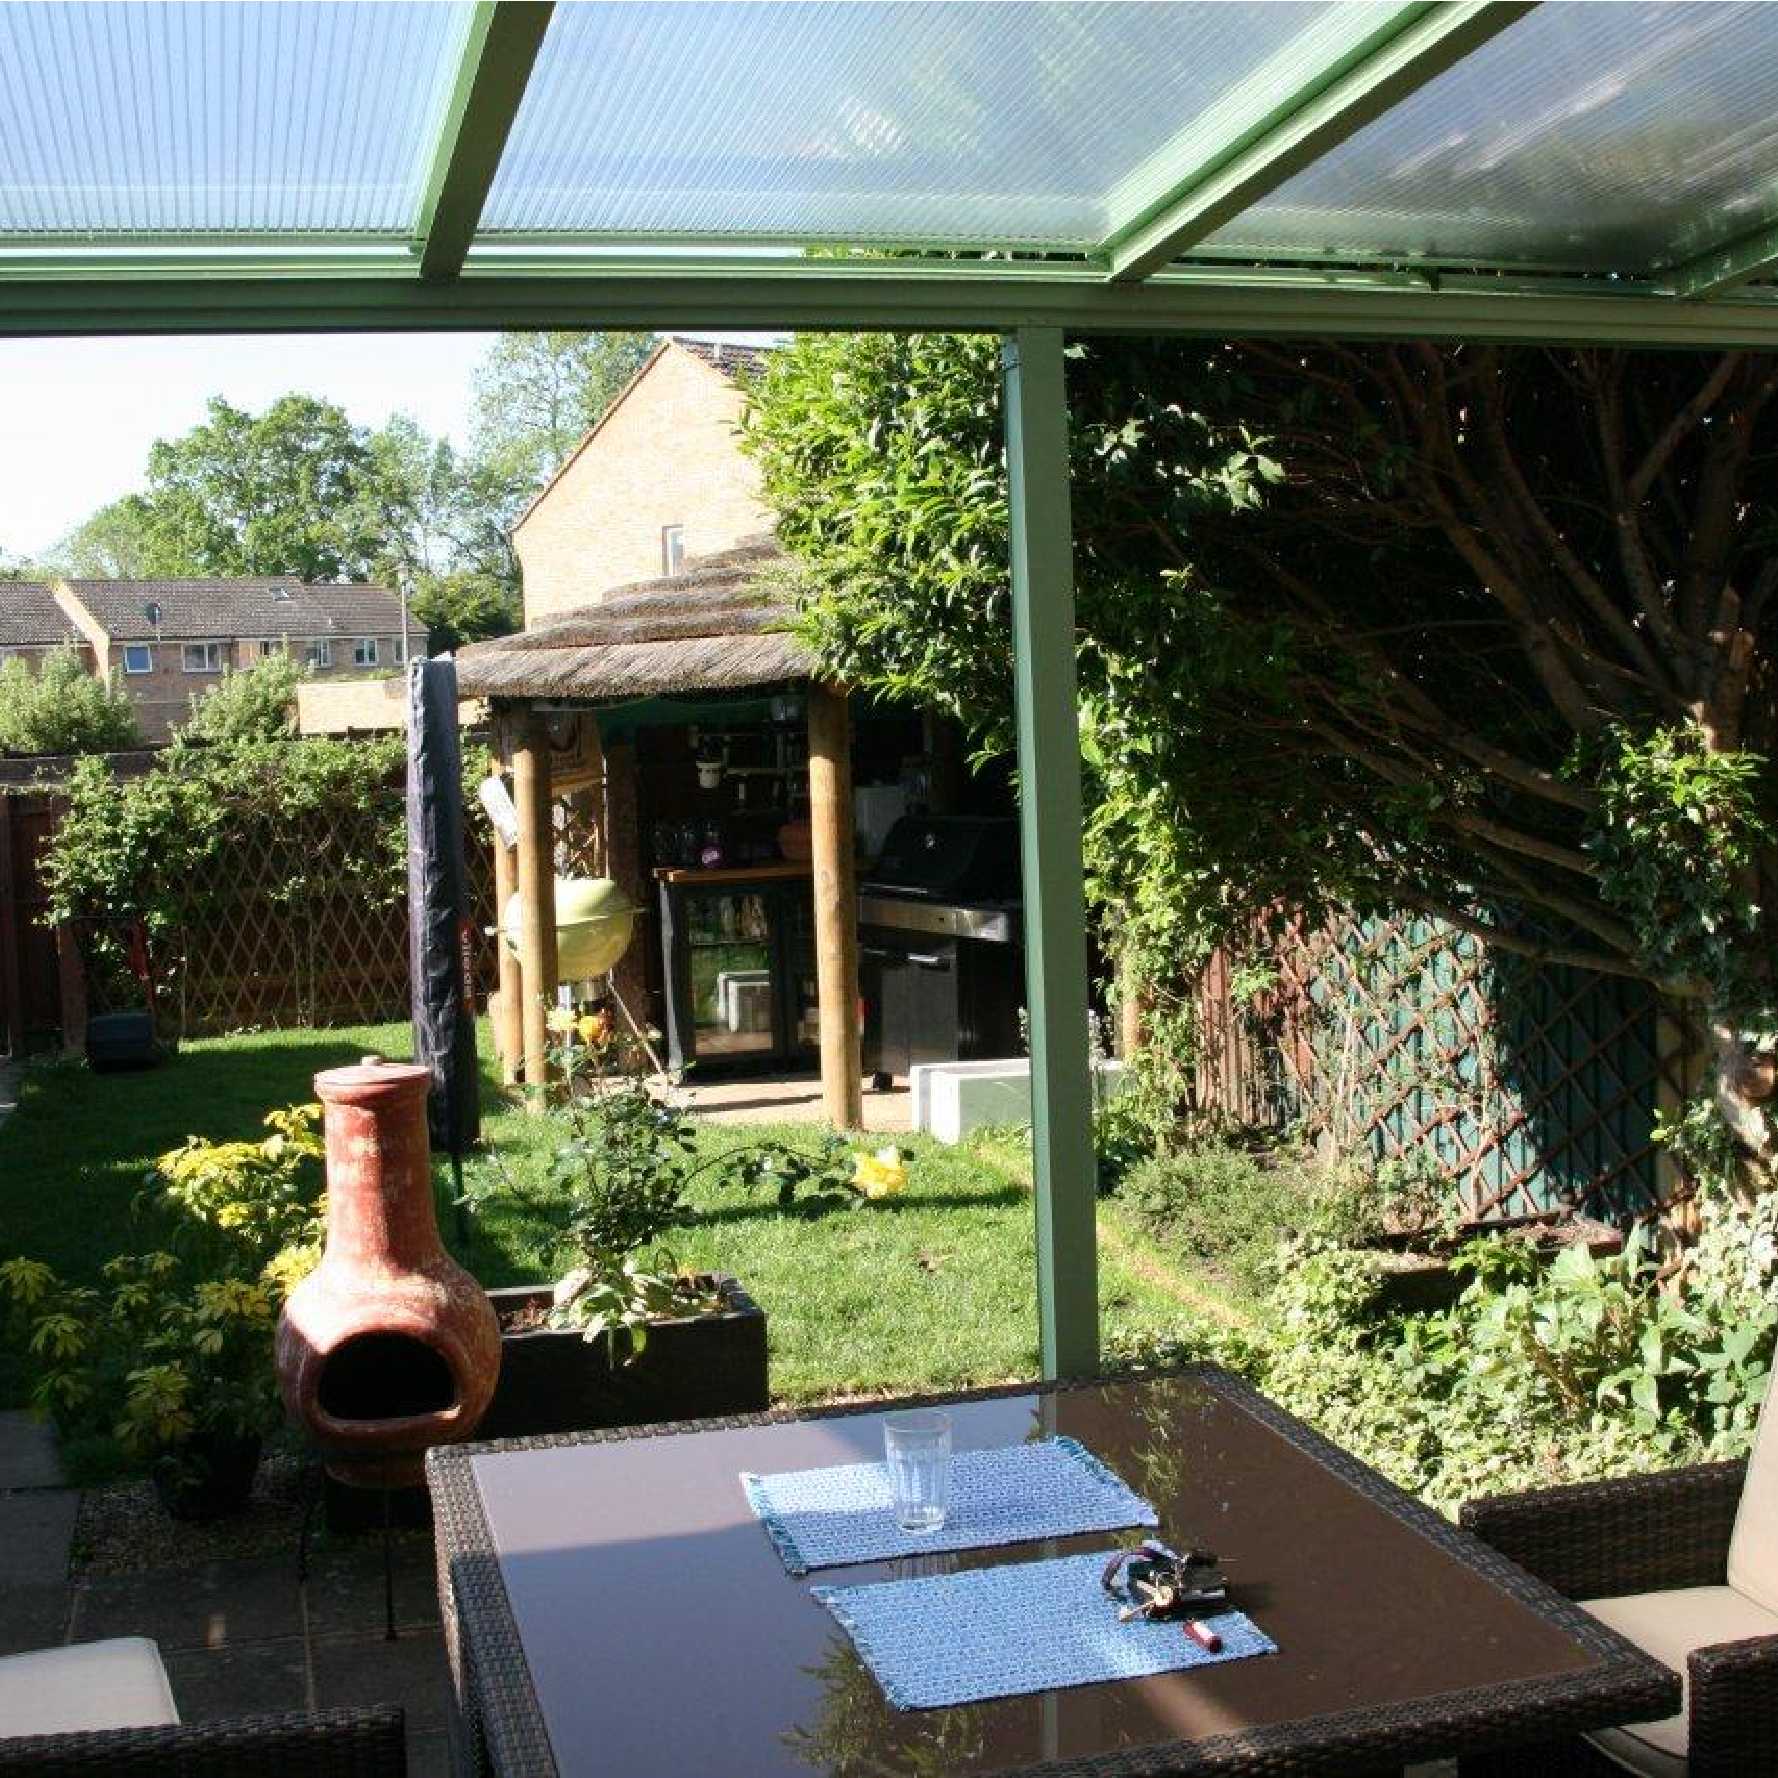 Affordable Omega Smart Lean-To Canopy, White with 16mm Polycarbonate Glazing - 2.8m (W) x 3.5m (P), (2) Supporting Posts